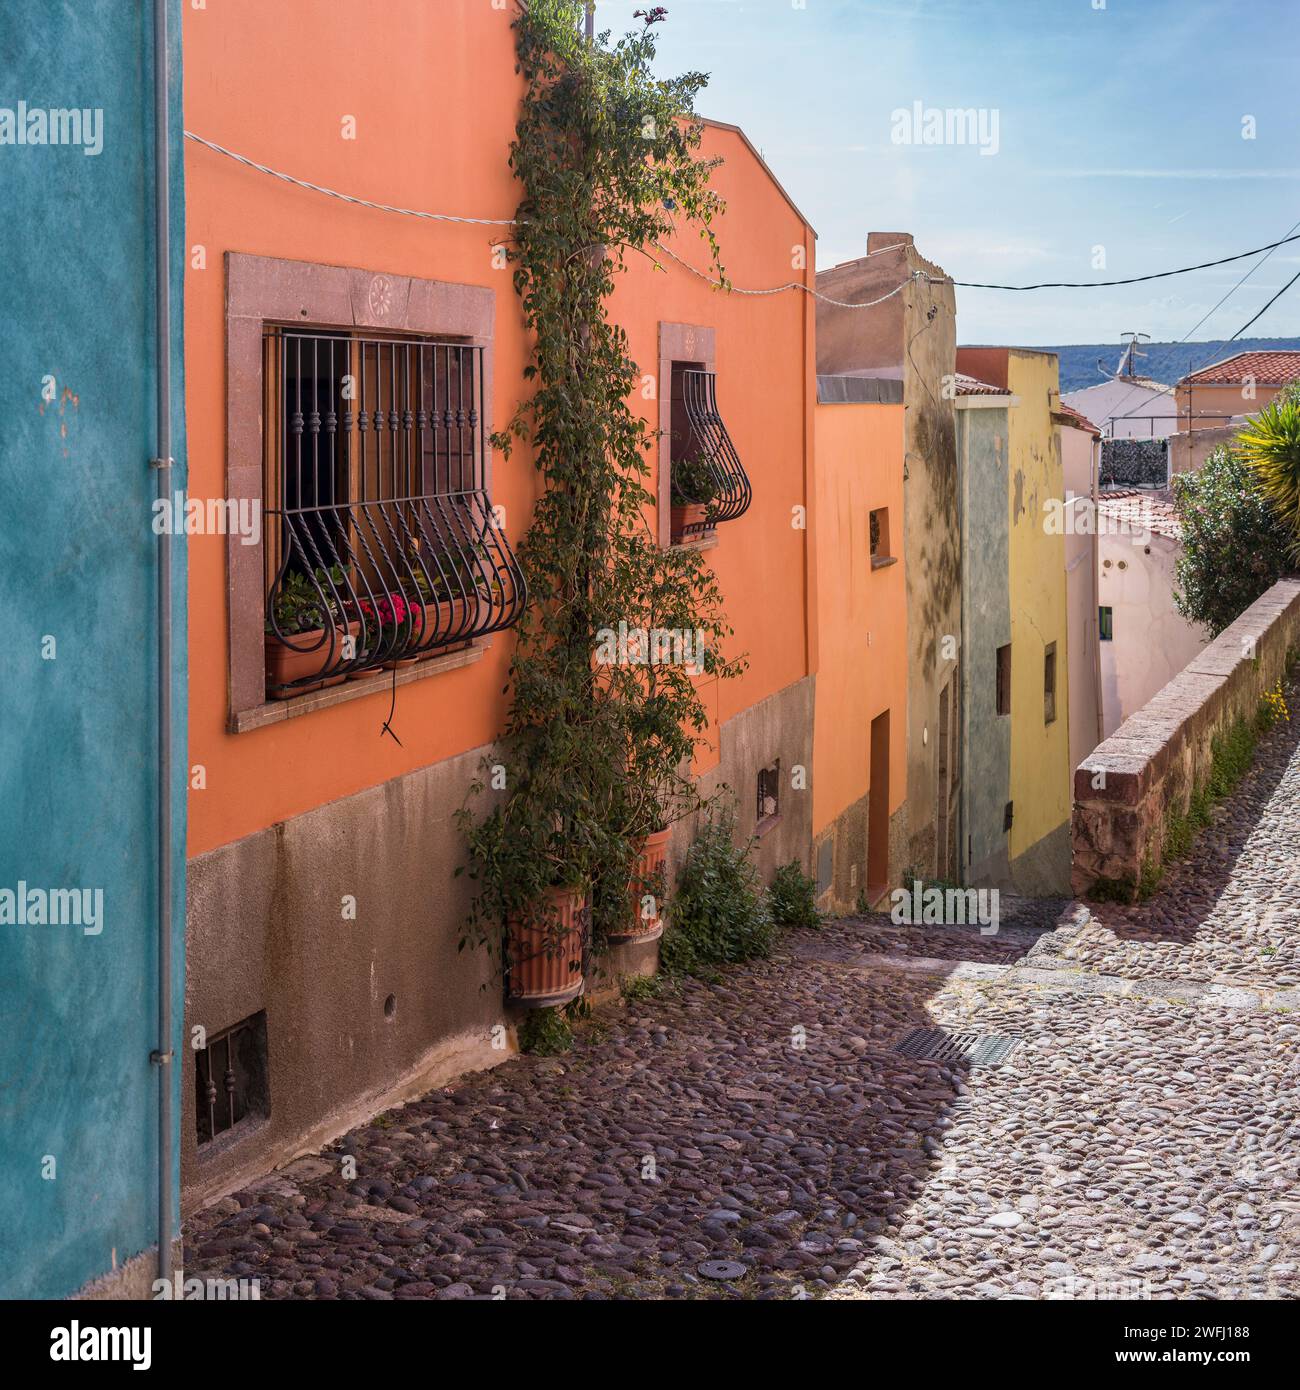 Row of buildings along a street in the Town of Bosa, Sardinia, Italy Stock Photo